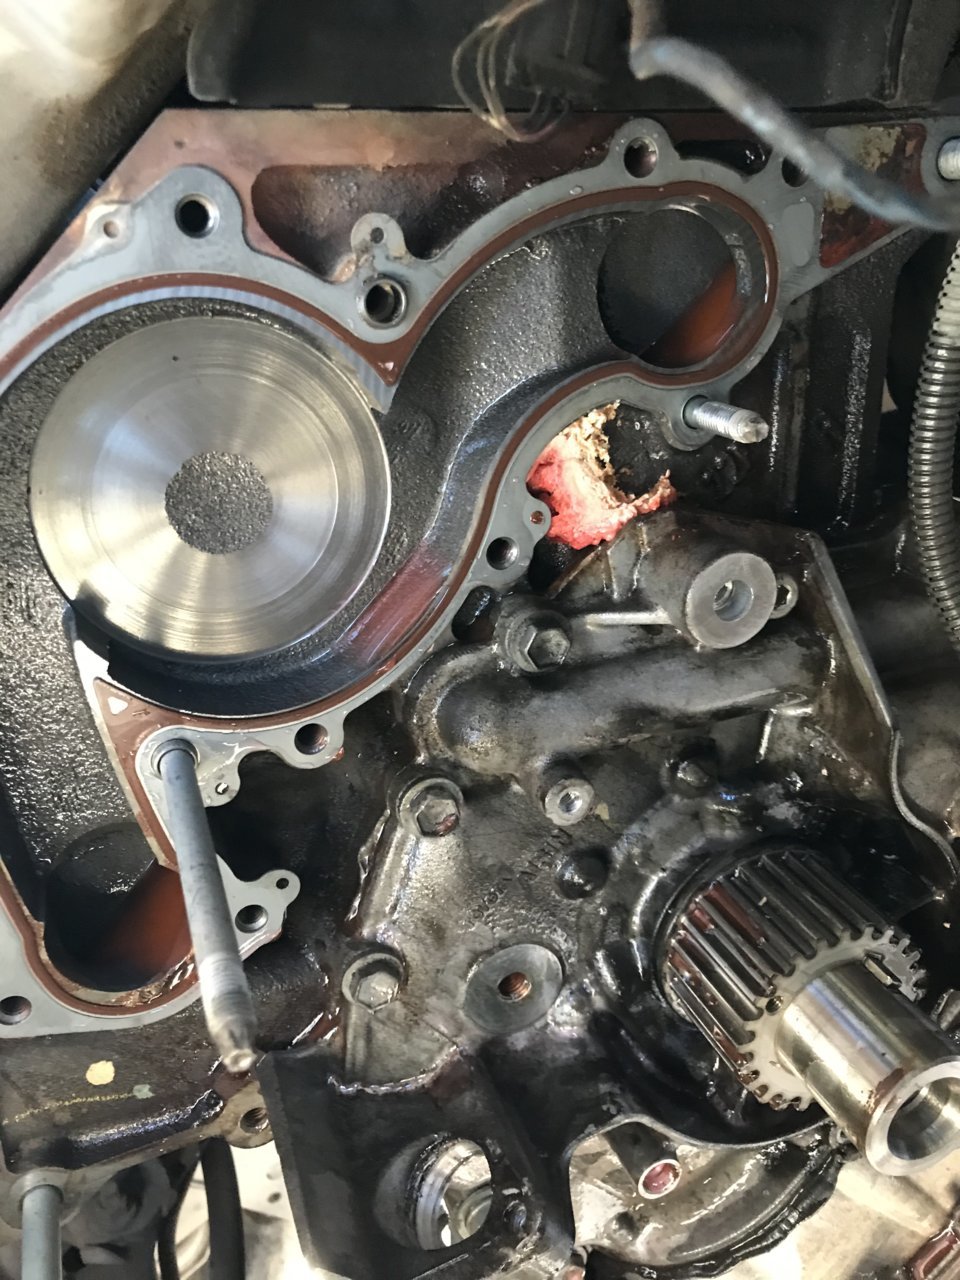 Timing belt and plugs at 178k miles | Toyota Tundra Forum